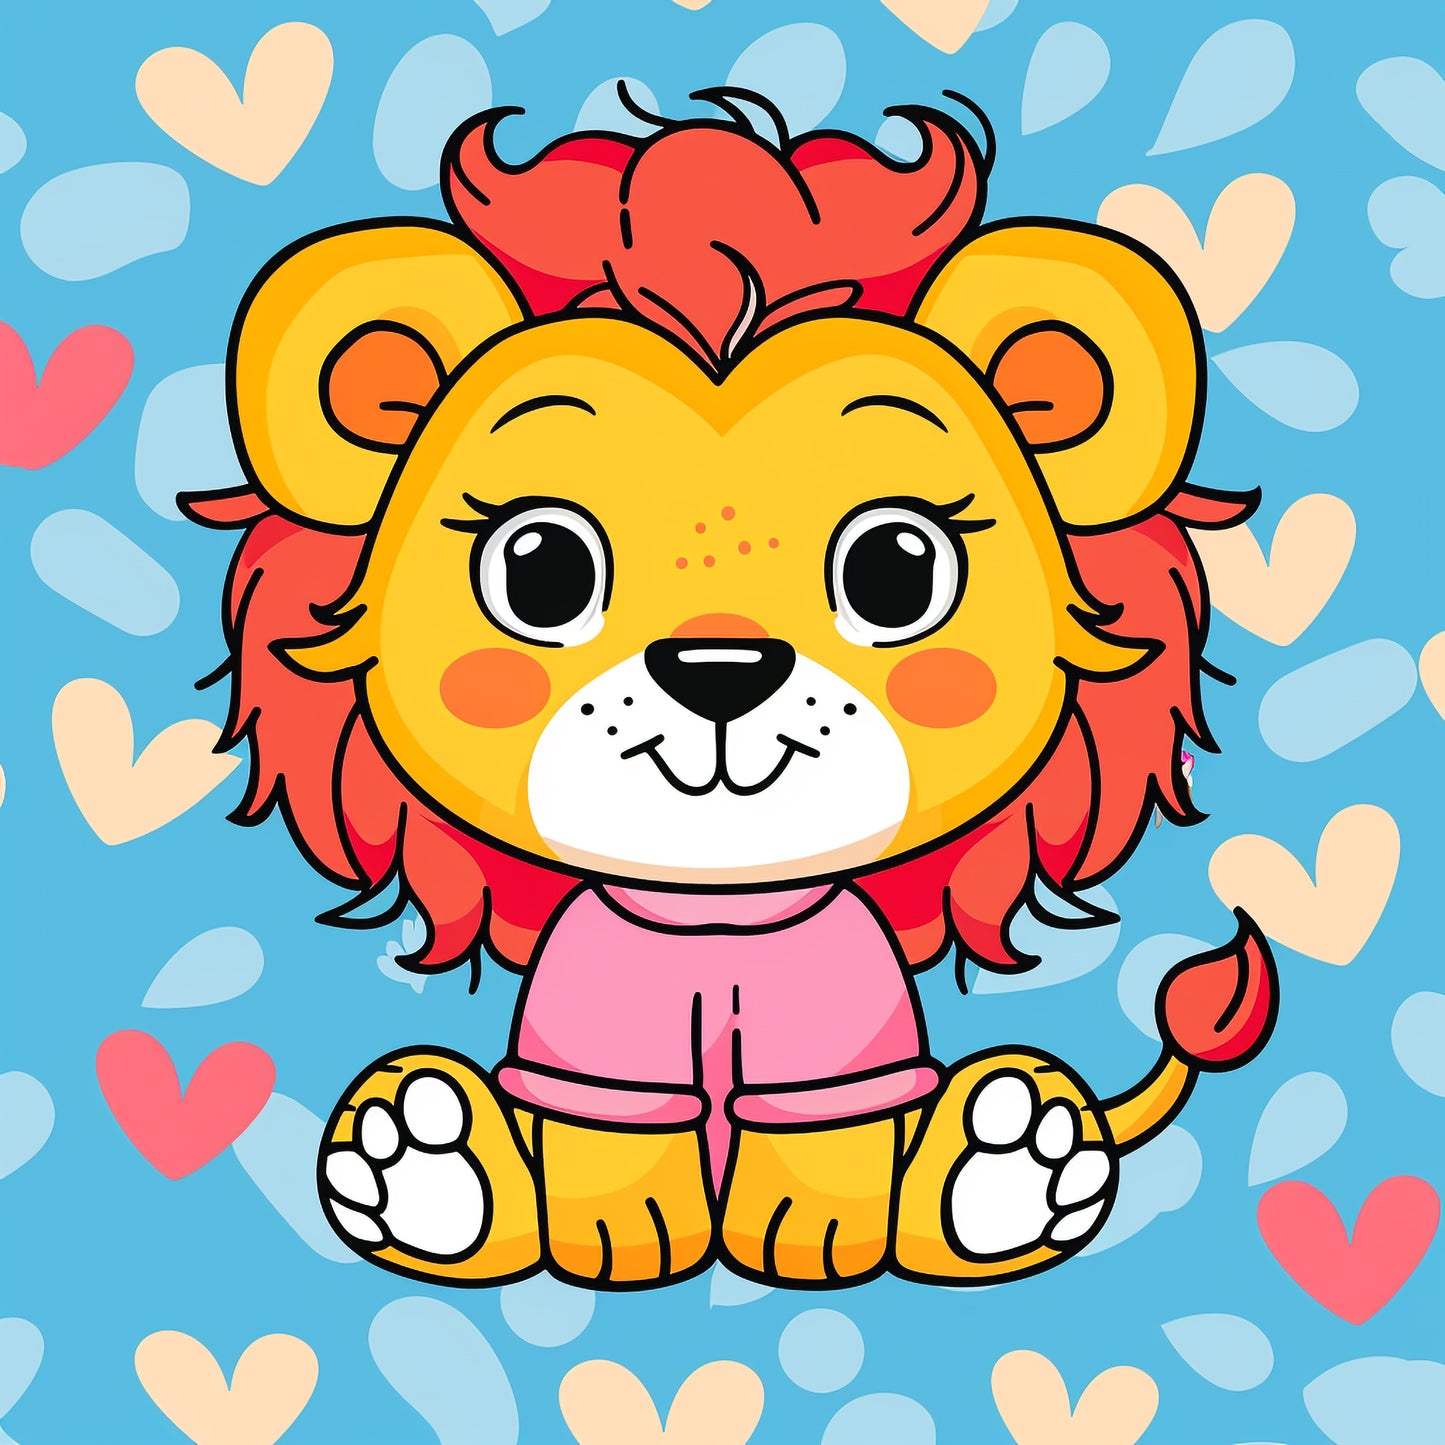 Adorable Baby Lion Cartoon on Heart Pattern Background